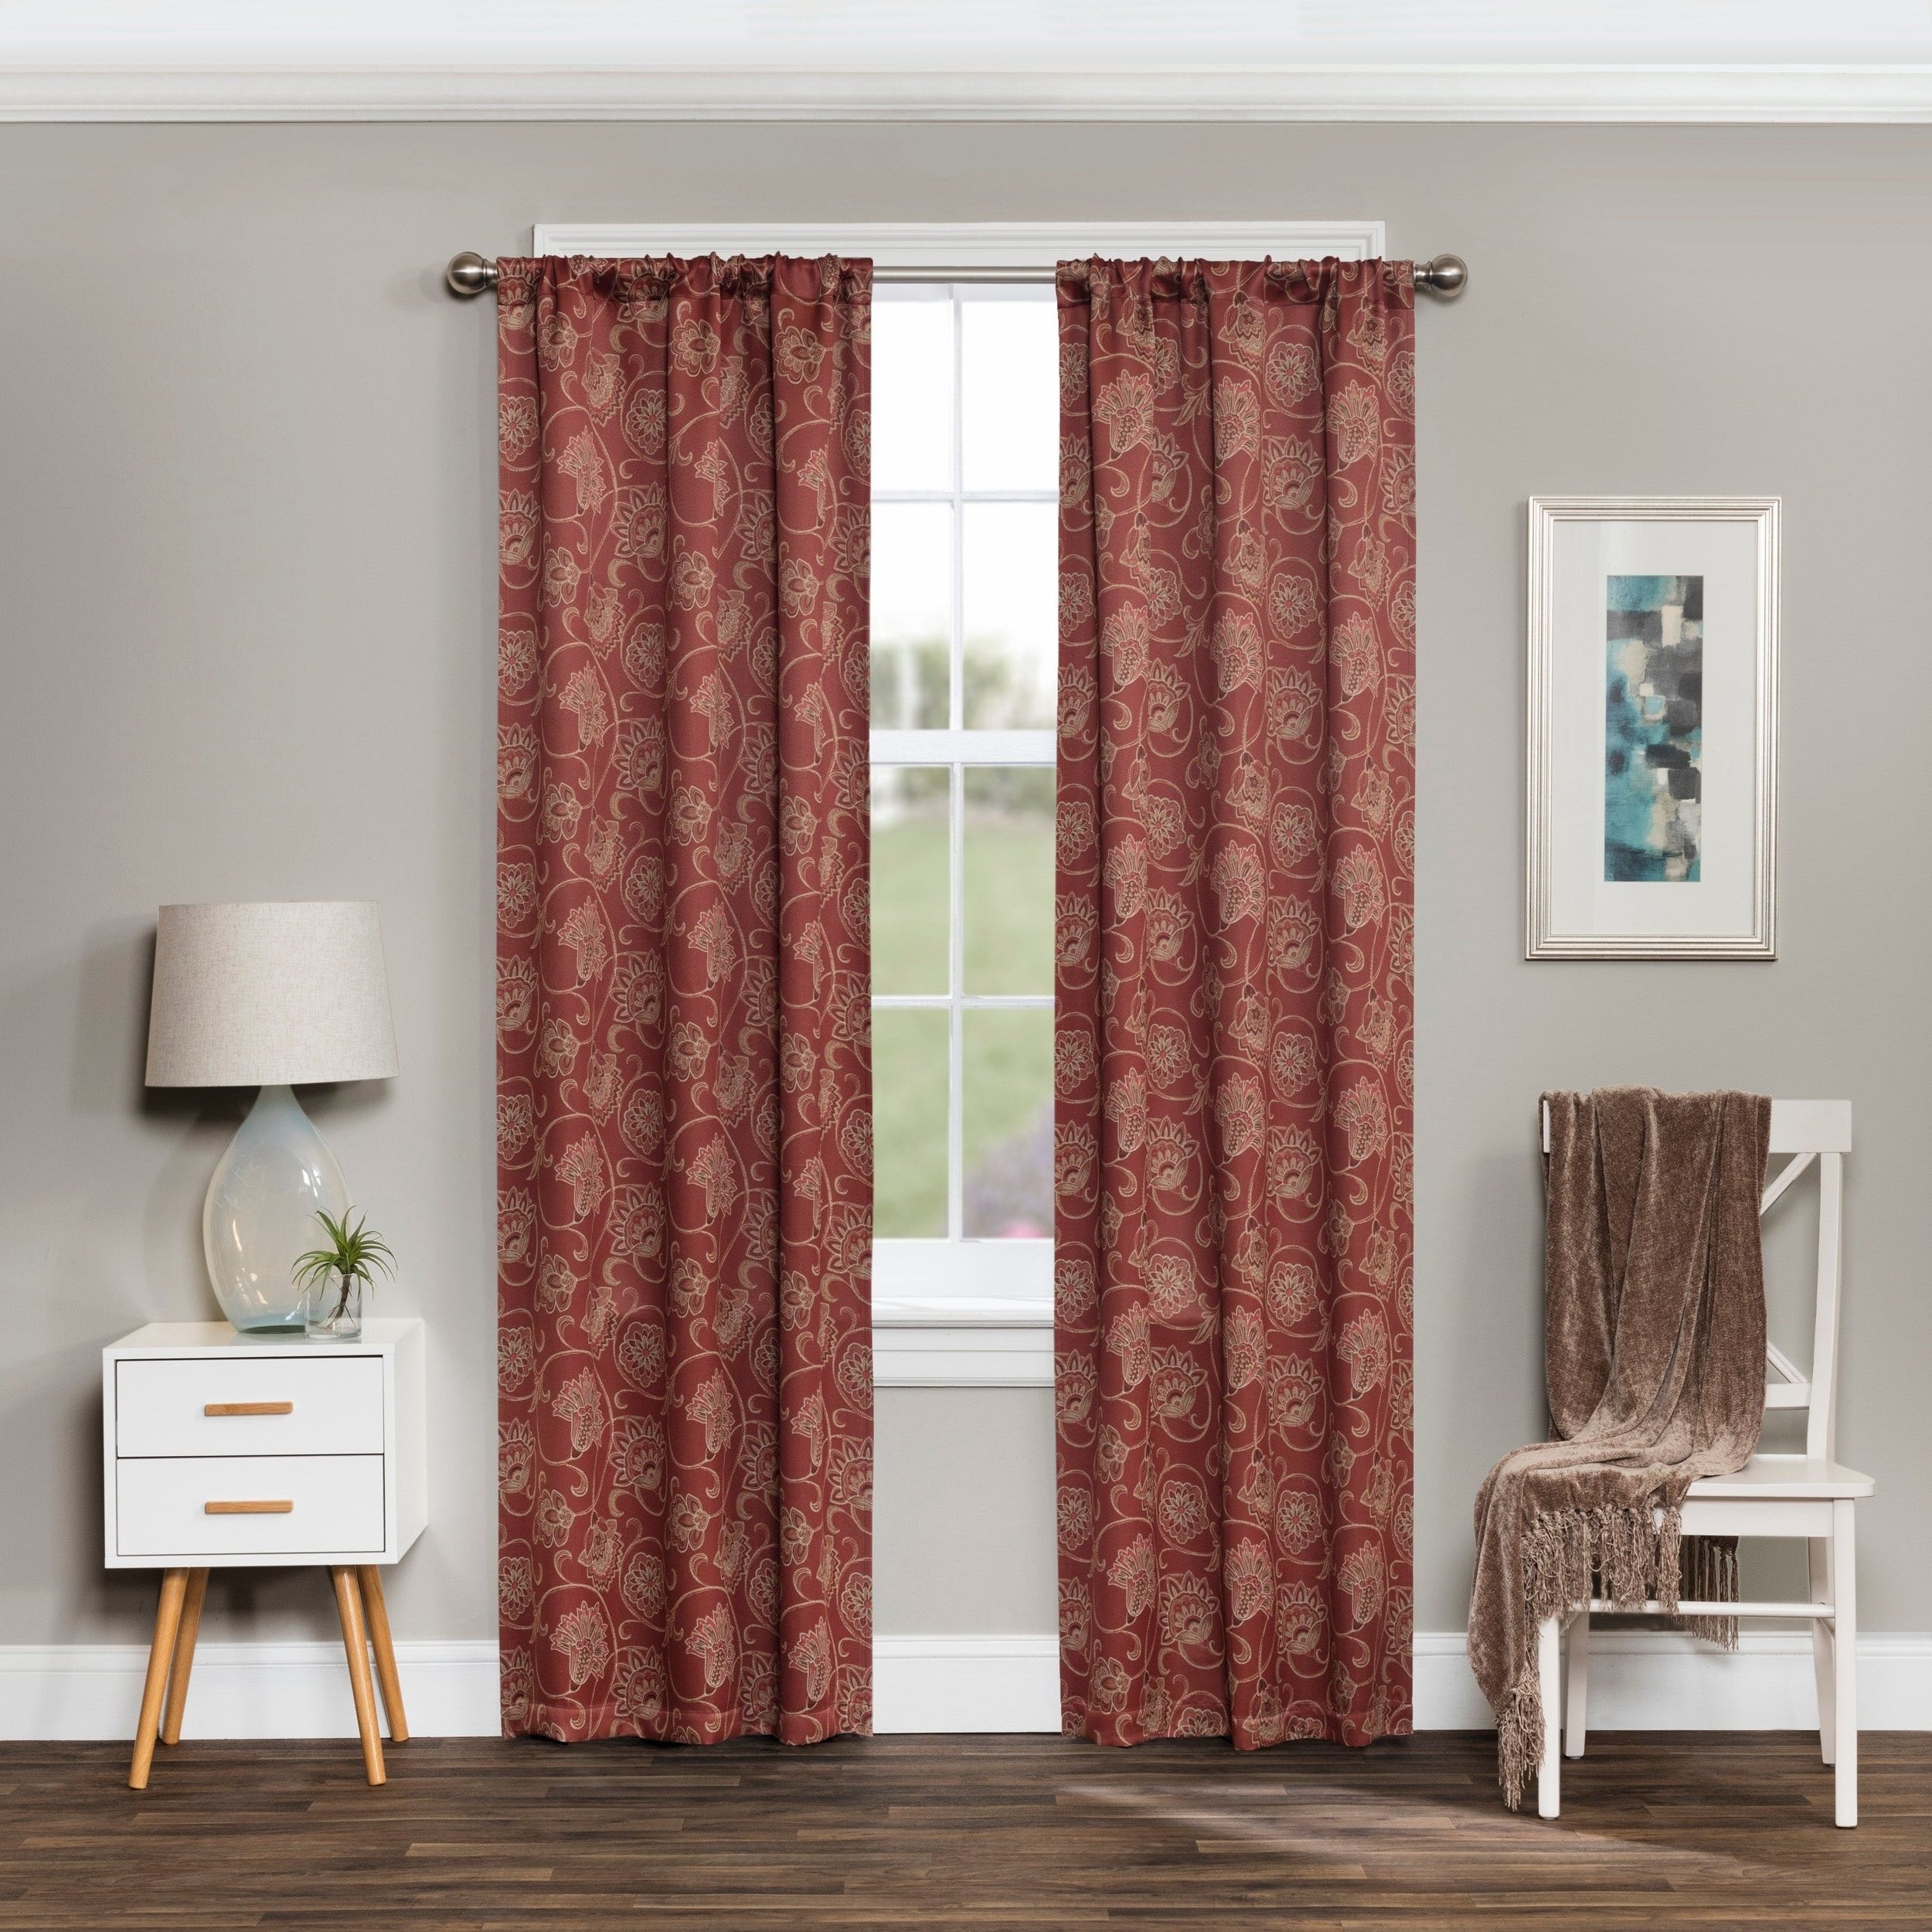 2020 Eclipse Darrell Thermaweave Blackout Window Curtain Panels In Eclipse Bryton Blackout Window Curtain (View 11 of 20)